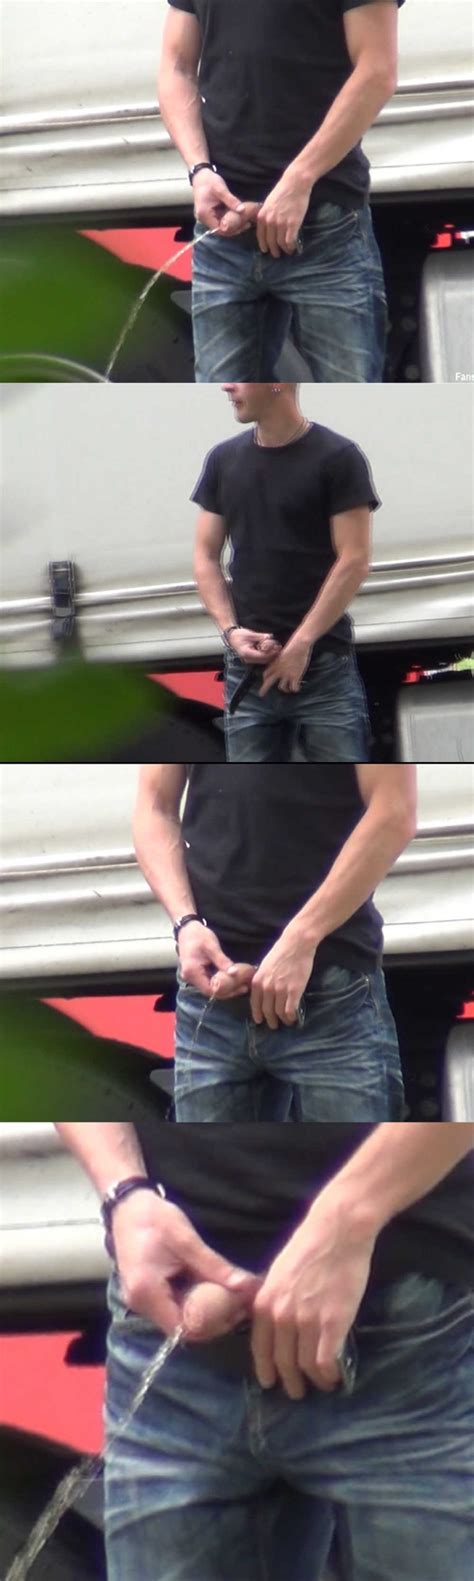 Uncut Trucker Caught Peeing In Public By Spy Cam Spycamfromguys